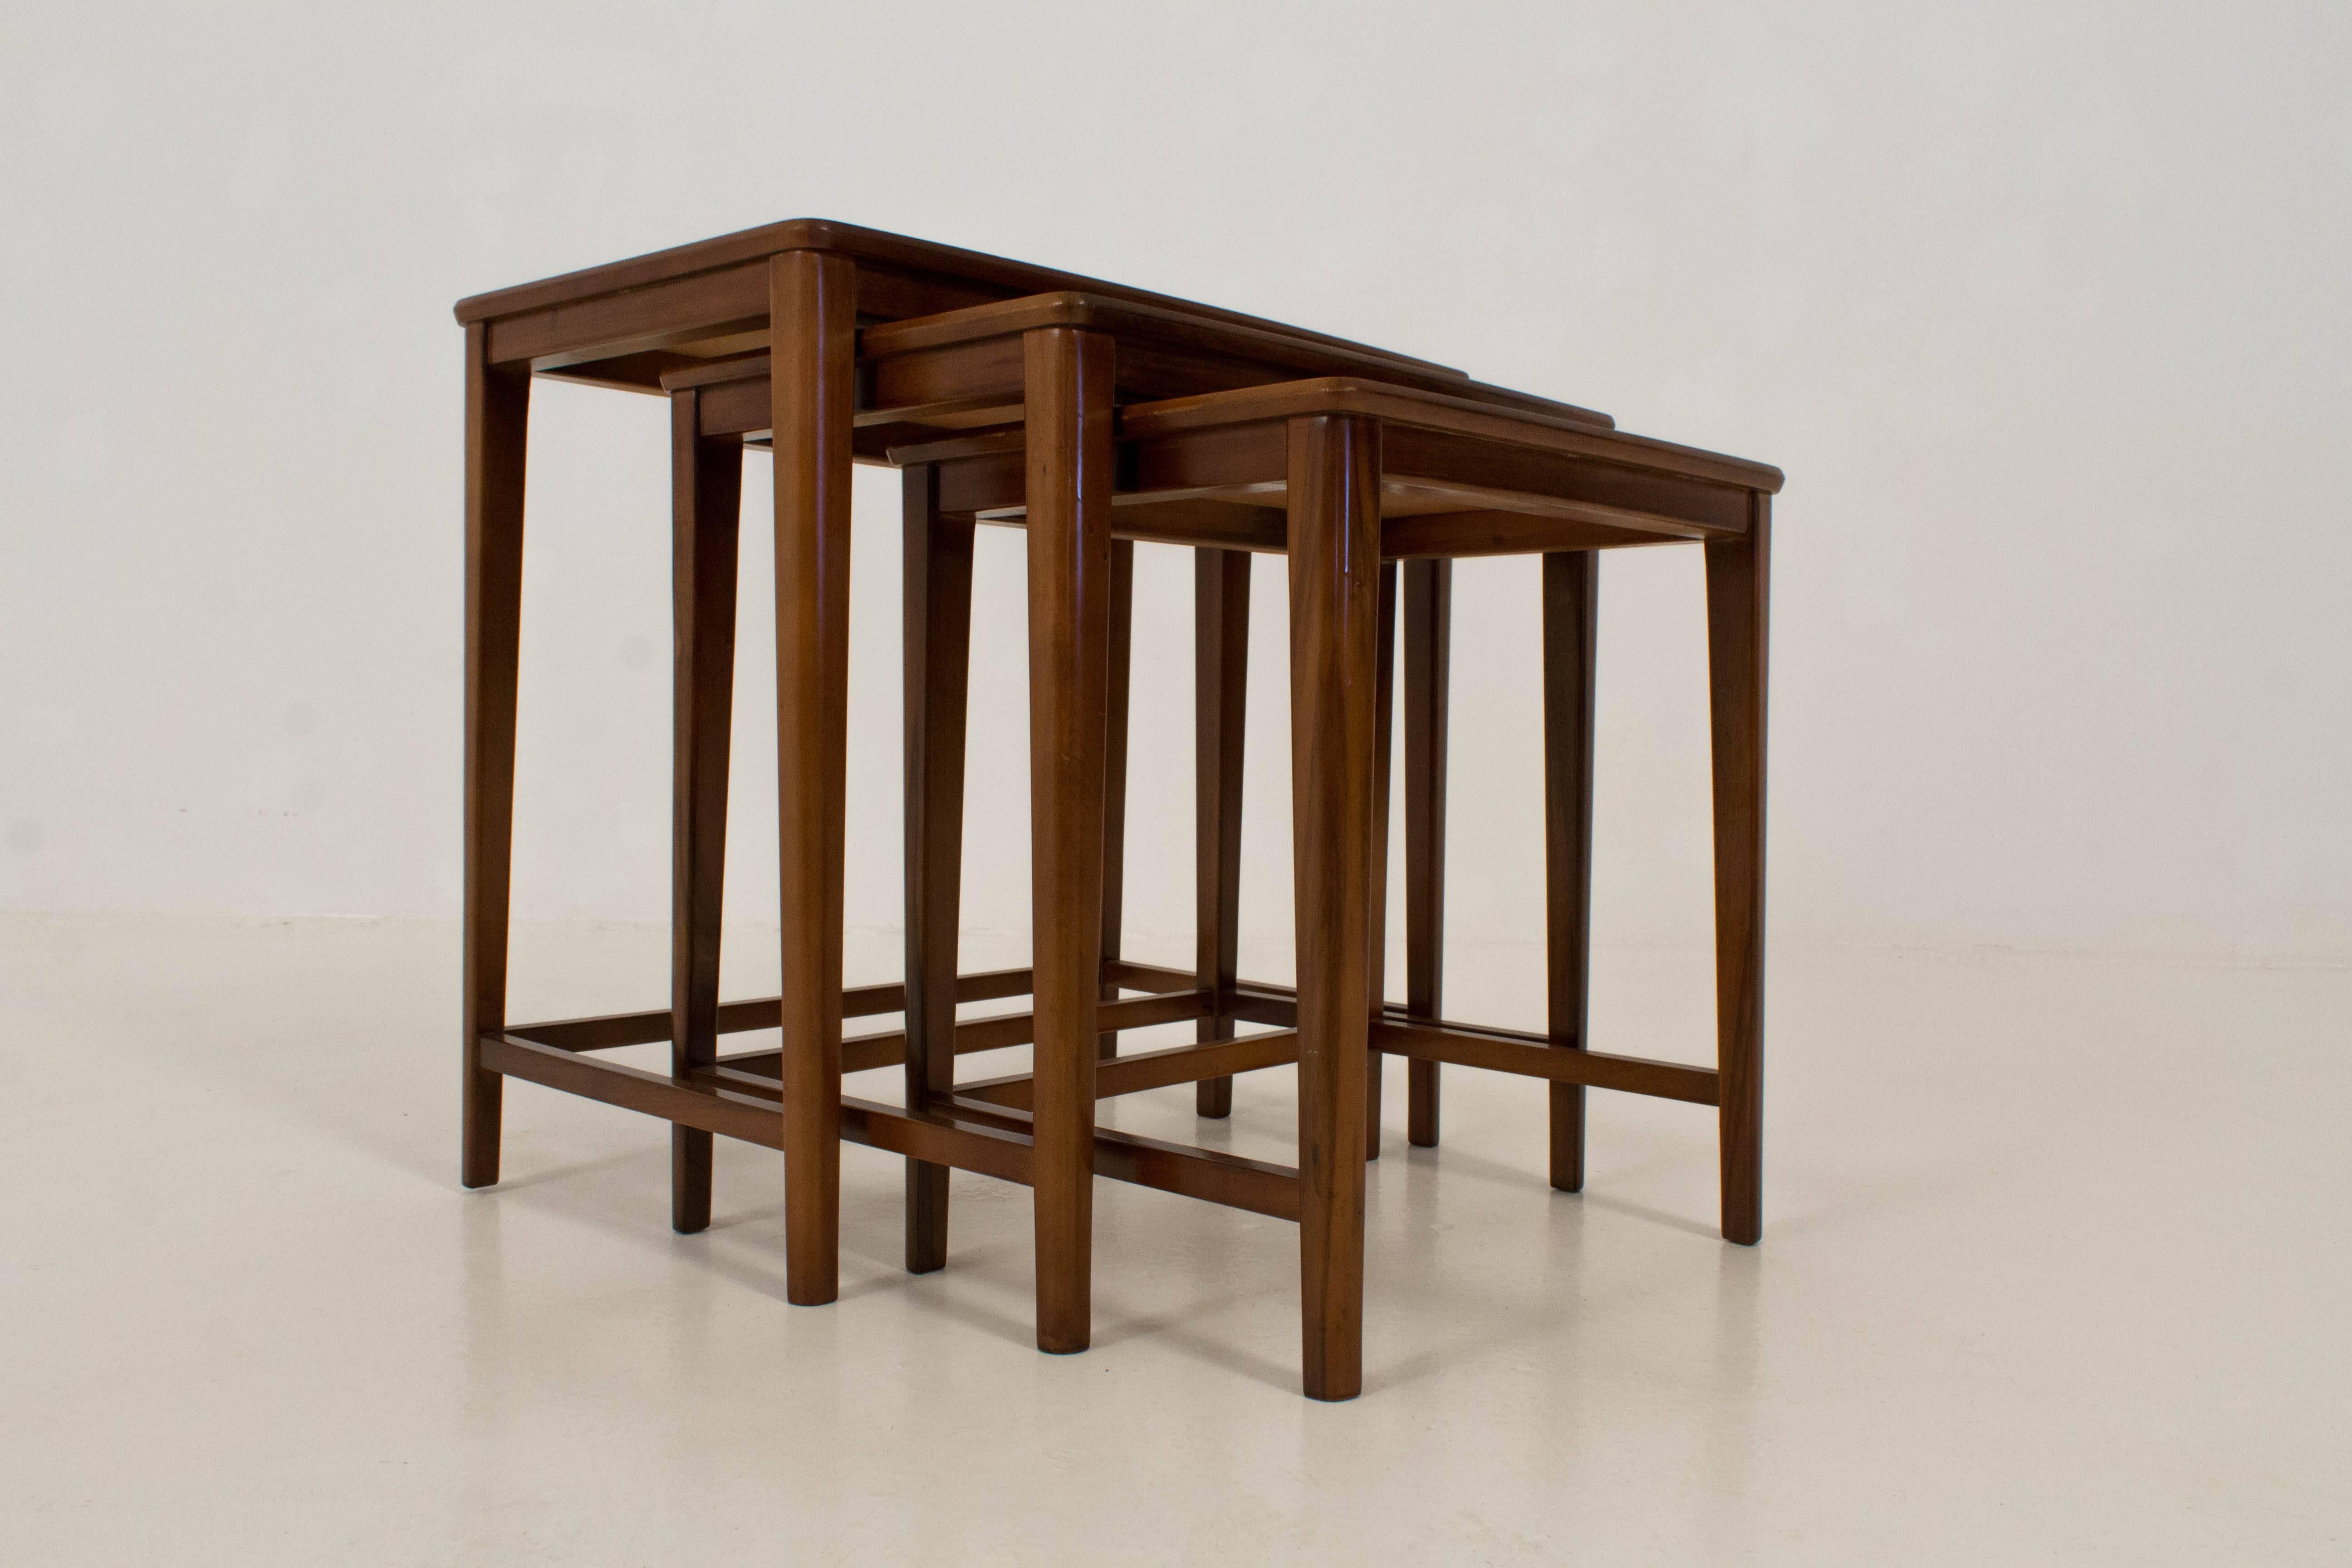 Walnut Mid-Century Modern nesting tables by A. A. Patijn for Zijlstra.
In good original condition with minor wear consistent with age and use,
preserving a beautiful patina.
Measurements: H 50 cm, W 53 cm, D 34 cm.
H 46 cm, W 46 cm, D 32 cm.
H